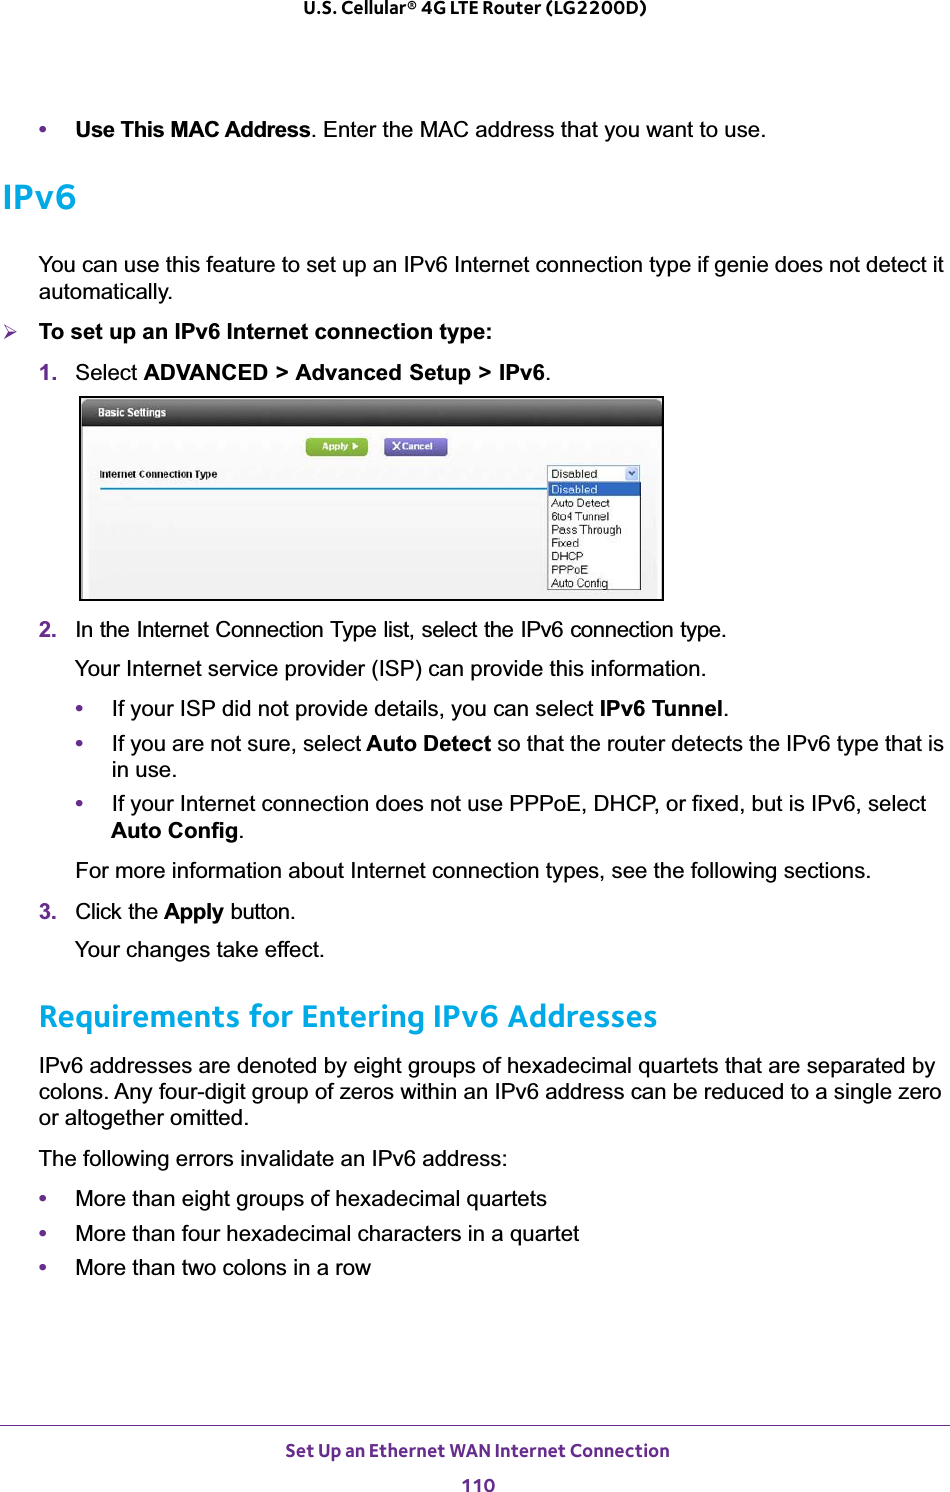 Set Up an Ethernet WAN Internet Connection110U.S. Cellular® 4G LTE Router (LG2200D) •Use This MAC Address. Enter the MAC address that you want to use.IPv6You can use this feature to set up an IPv6 Internet connection type if genie does not detect it automatically.¾To set up an IPv6 Internet connection type:1. Select ADVANCED &gt; Advanced Setup &gt; IPv6.2. In the Internet Connection Type list, select the IPv6 connection type. Your Internet service provider (ISP) can provide this information.•If your ISP did not provide details, you can select IPv6 Tunnel.•If you are not sure, select Auto Detect so that the router detects the IPv6 type that is in use.•If your Internet connection does not use PPPoE, DHCP, or fixed, but is IPv6, select Auto Config.For more information about Internet connection types, see the following sections.3. Click the Apply button.Your changes take effect.Requirements for Entering IPv6 AddressesIPv6 addresses are denoted by eight groups of hexadecimal quartets that are separated by colons. Any four-digit group of zeros within an IPv6 address can be reduced to a single zero or altogether omitted.The following errors invalidate an IPv6 address:•More than eight groups of hexadecimal quartets•More than four hexadecimal characters in a quartet•More than two colons in a row